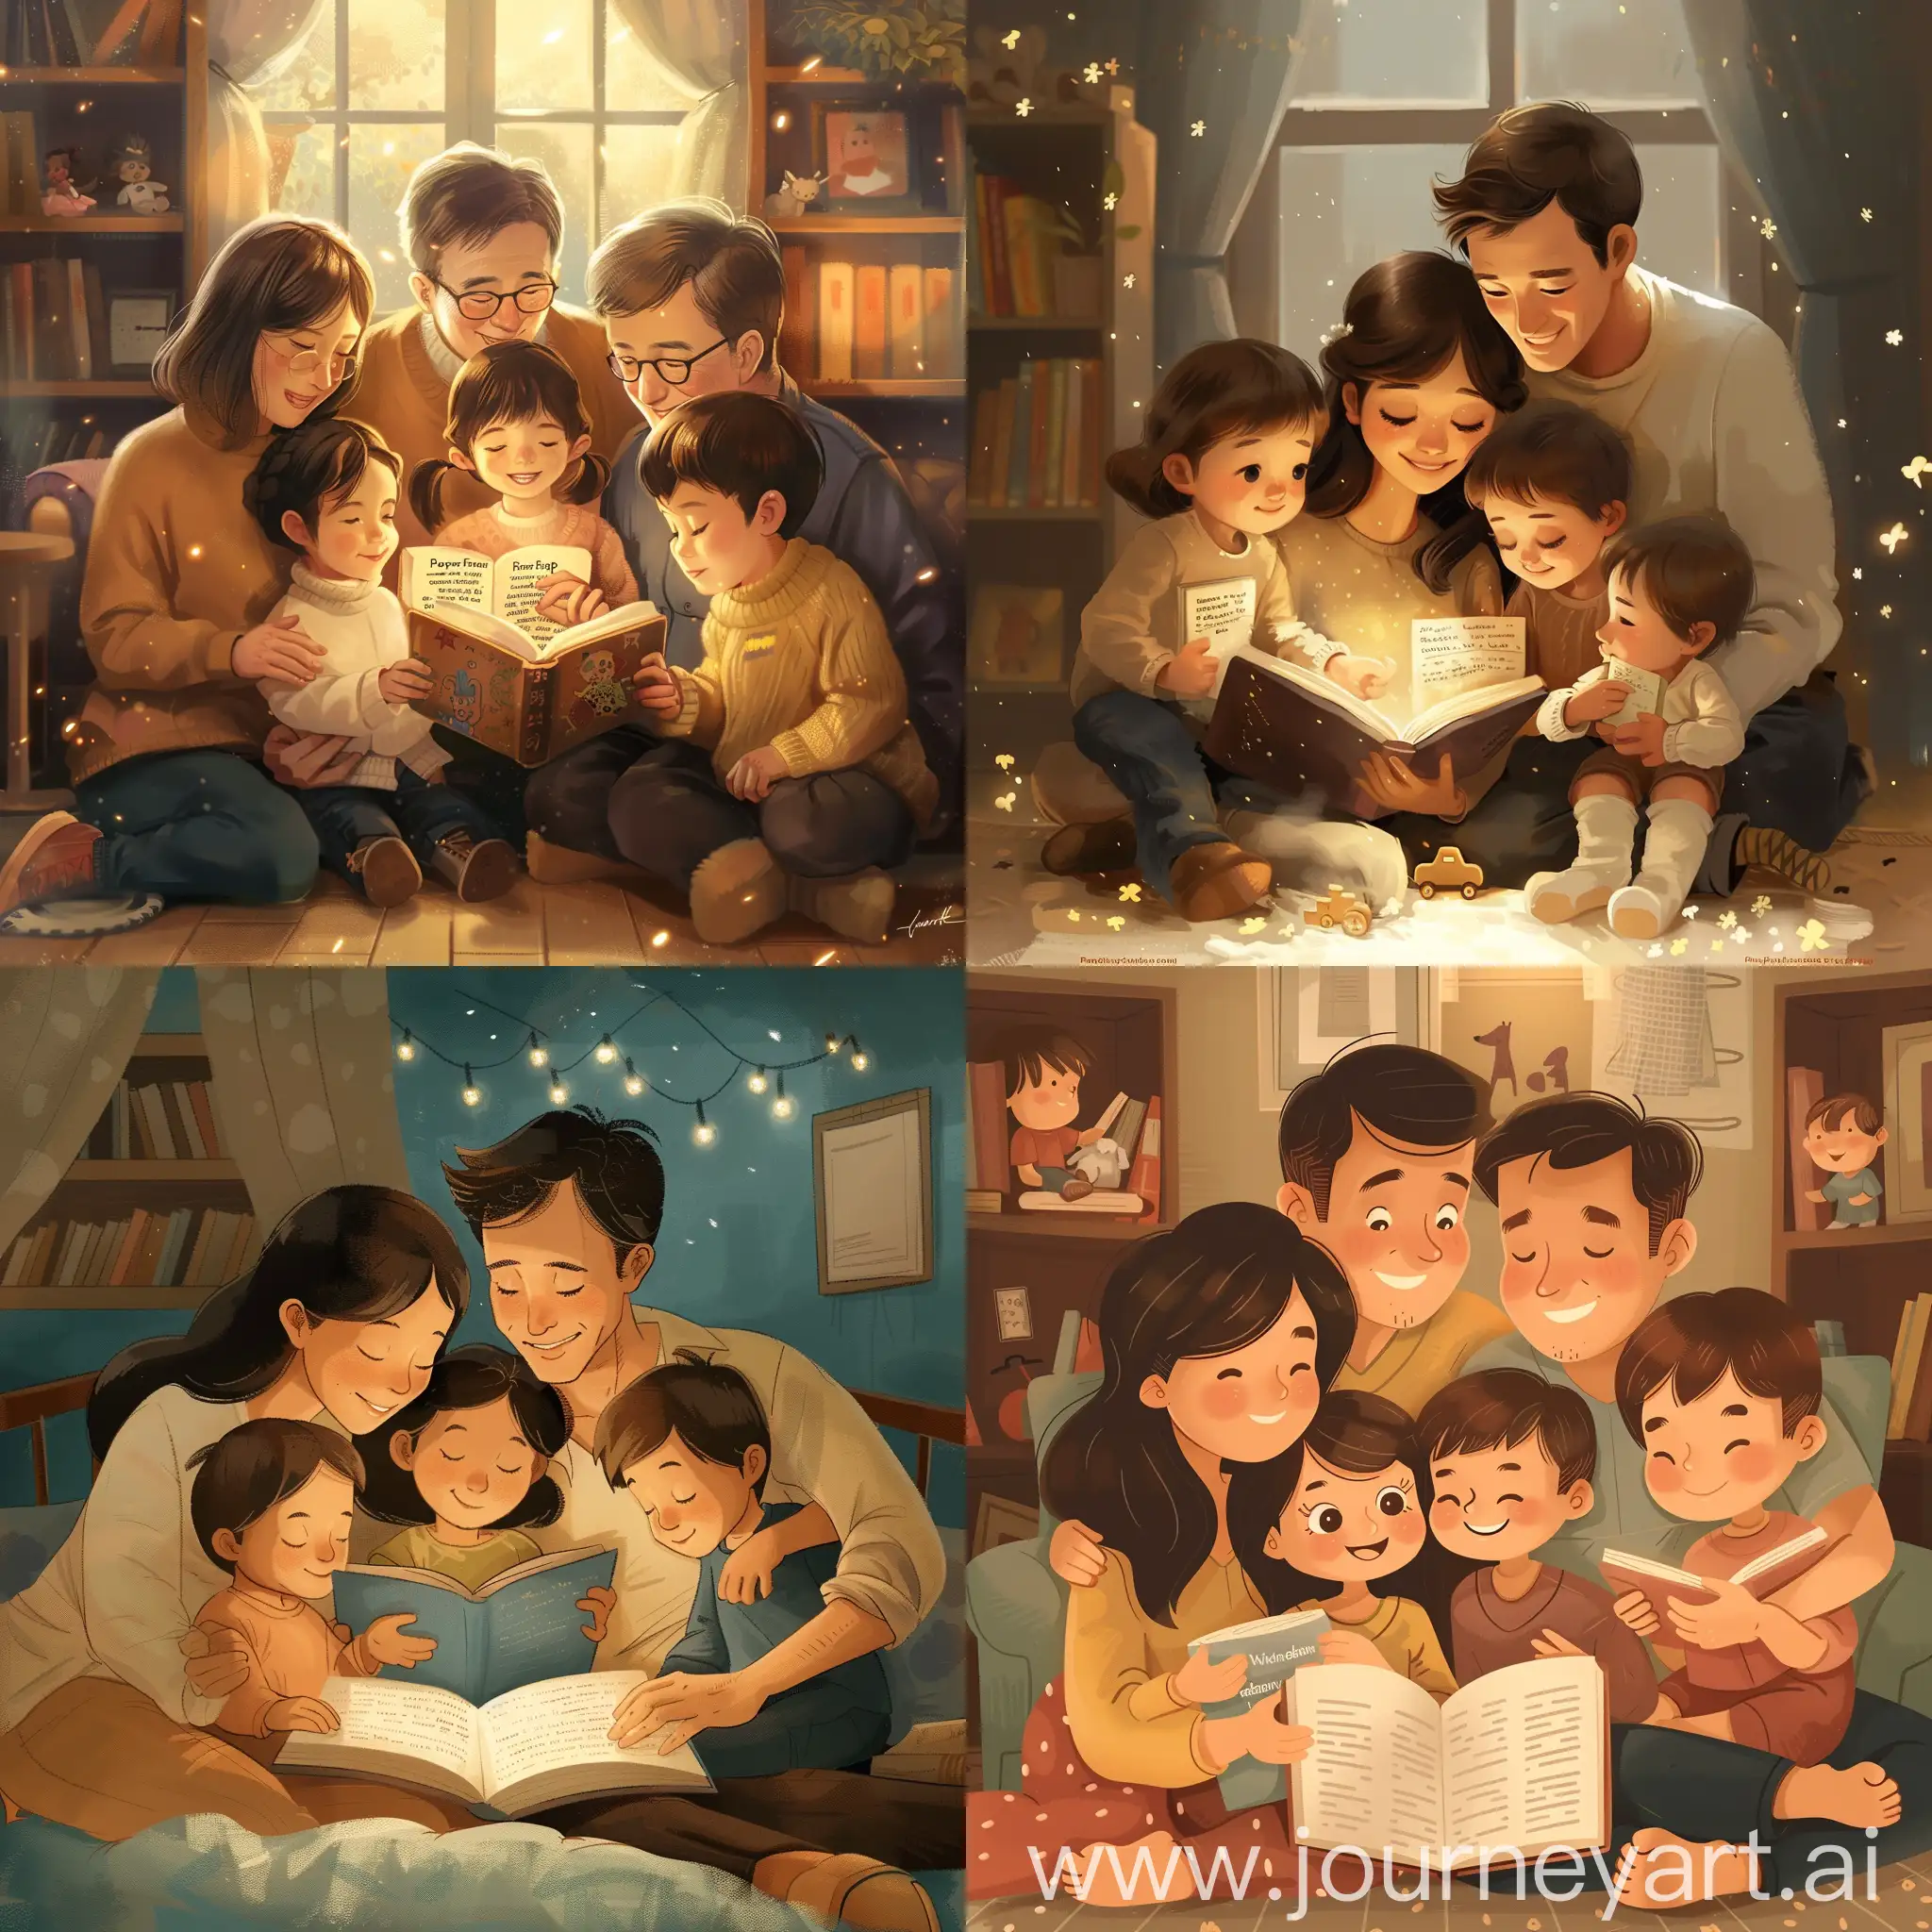 Warm-Family-Reading-Together-in-Cozy-Room-Parental-Companionship-and-Happy-Moments